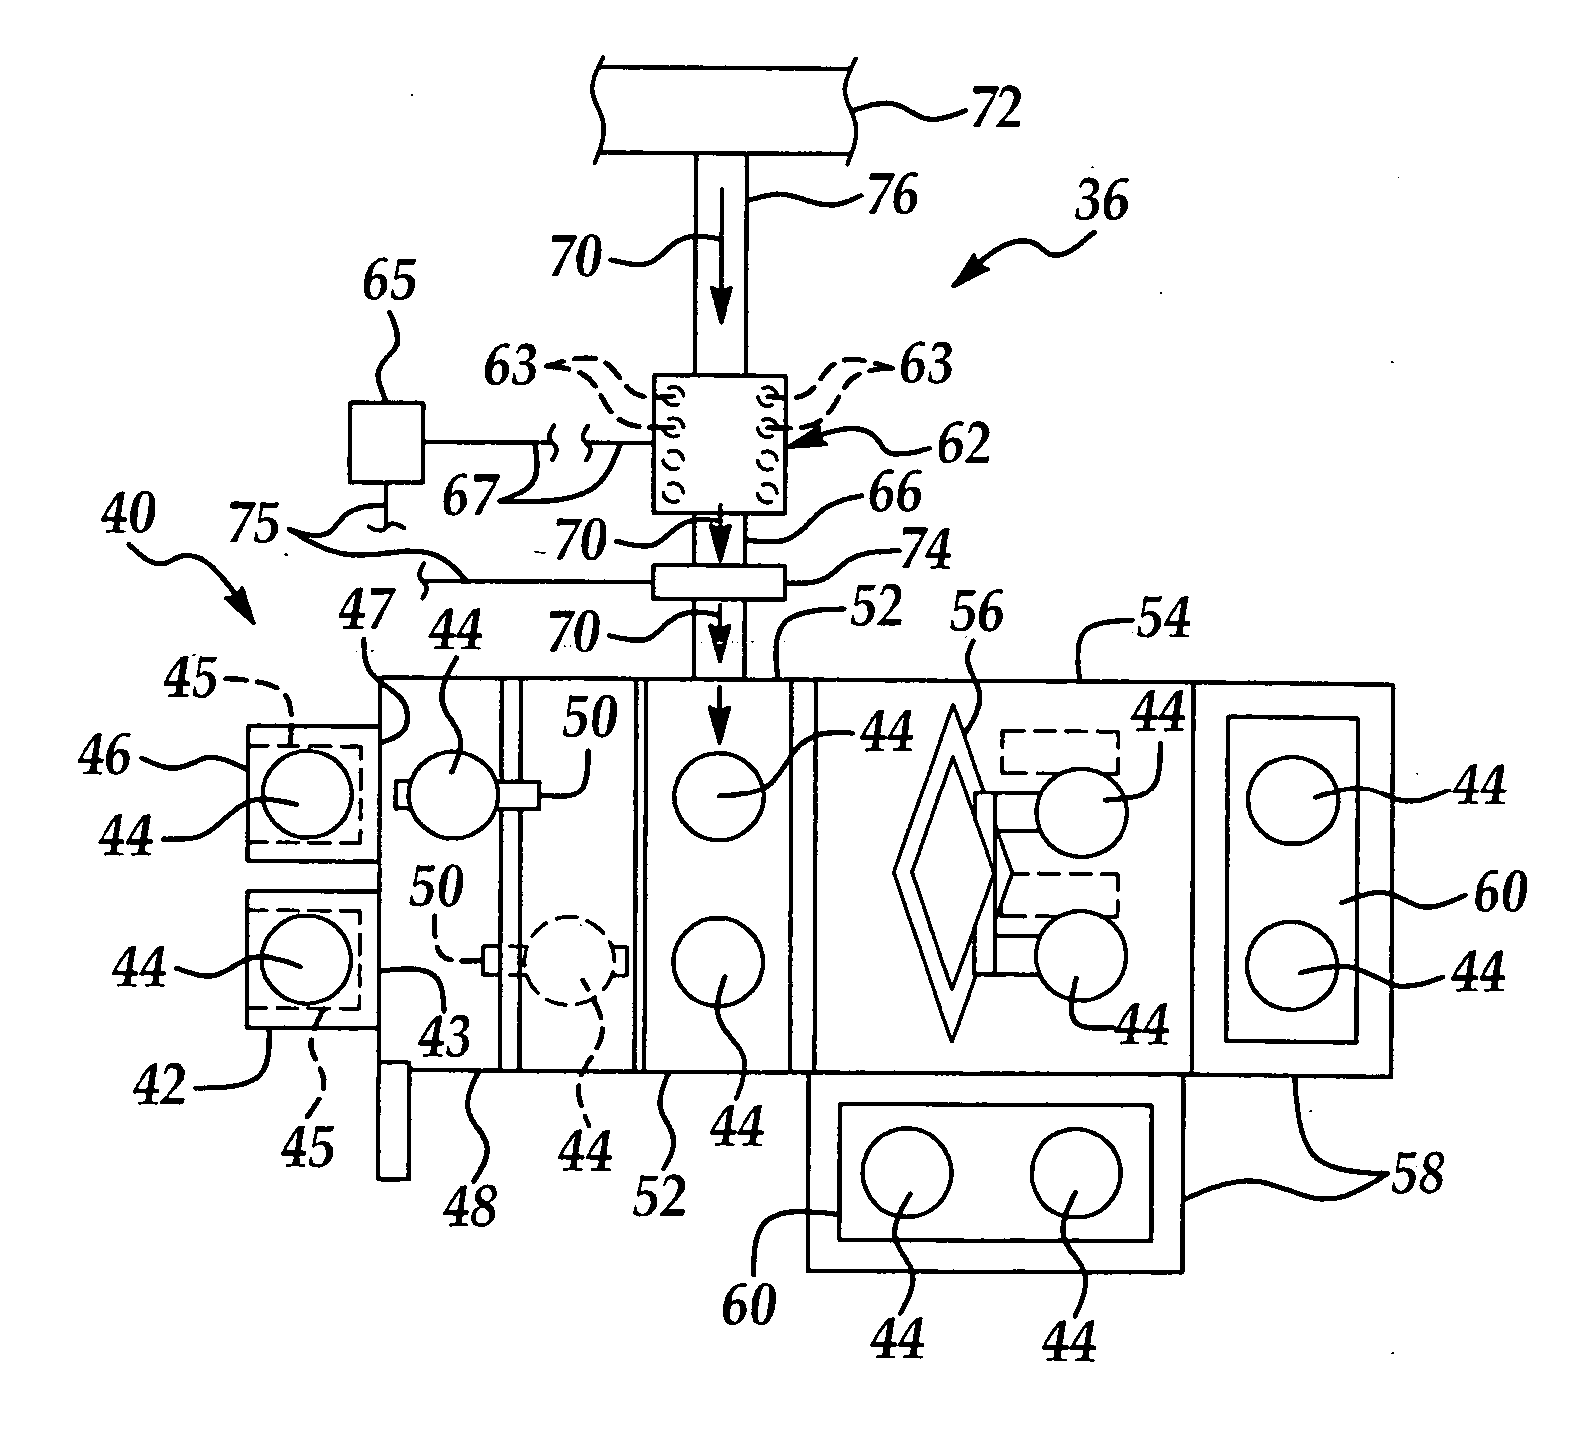 Heating system for load-lock chamber